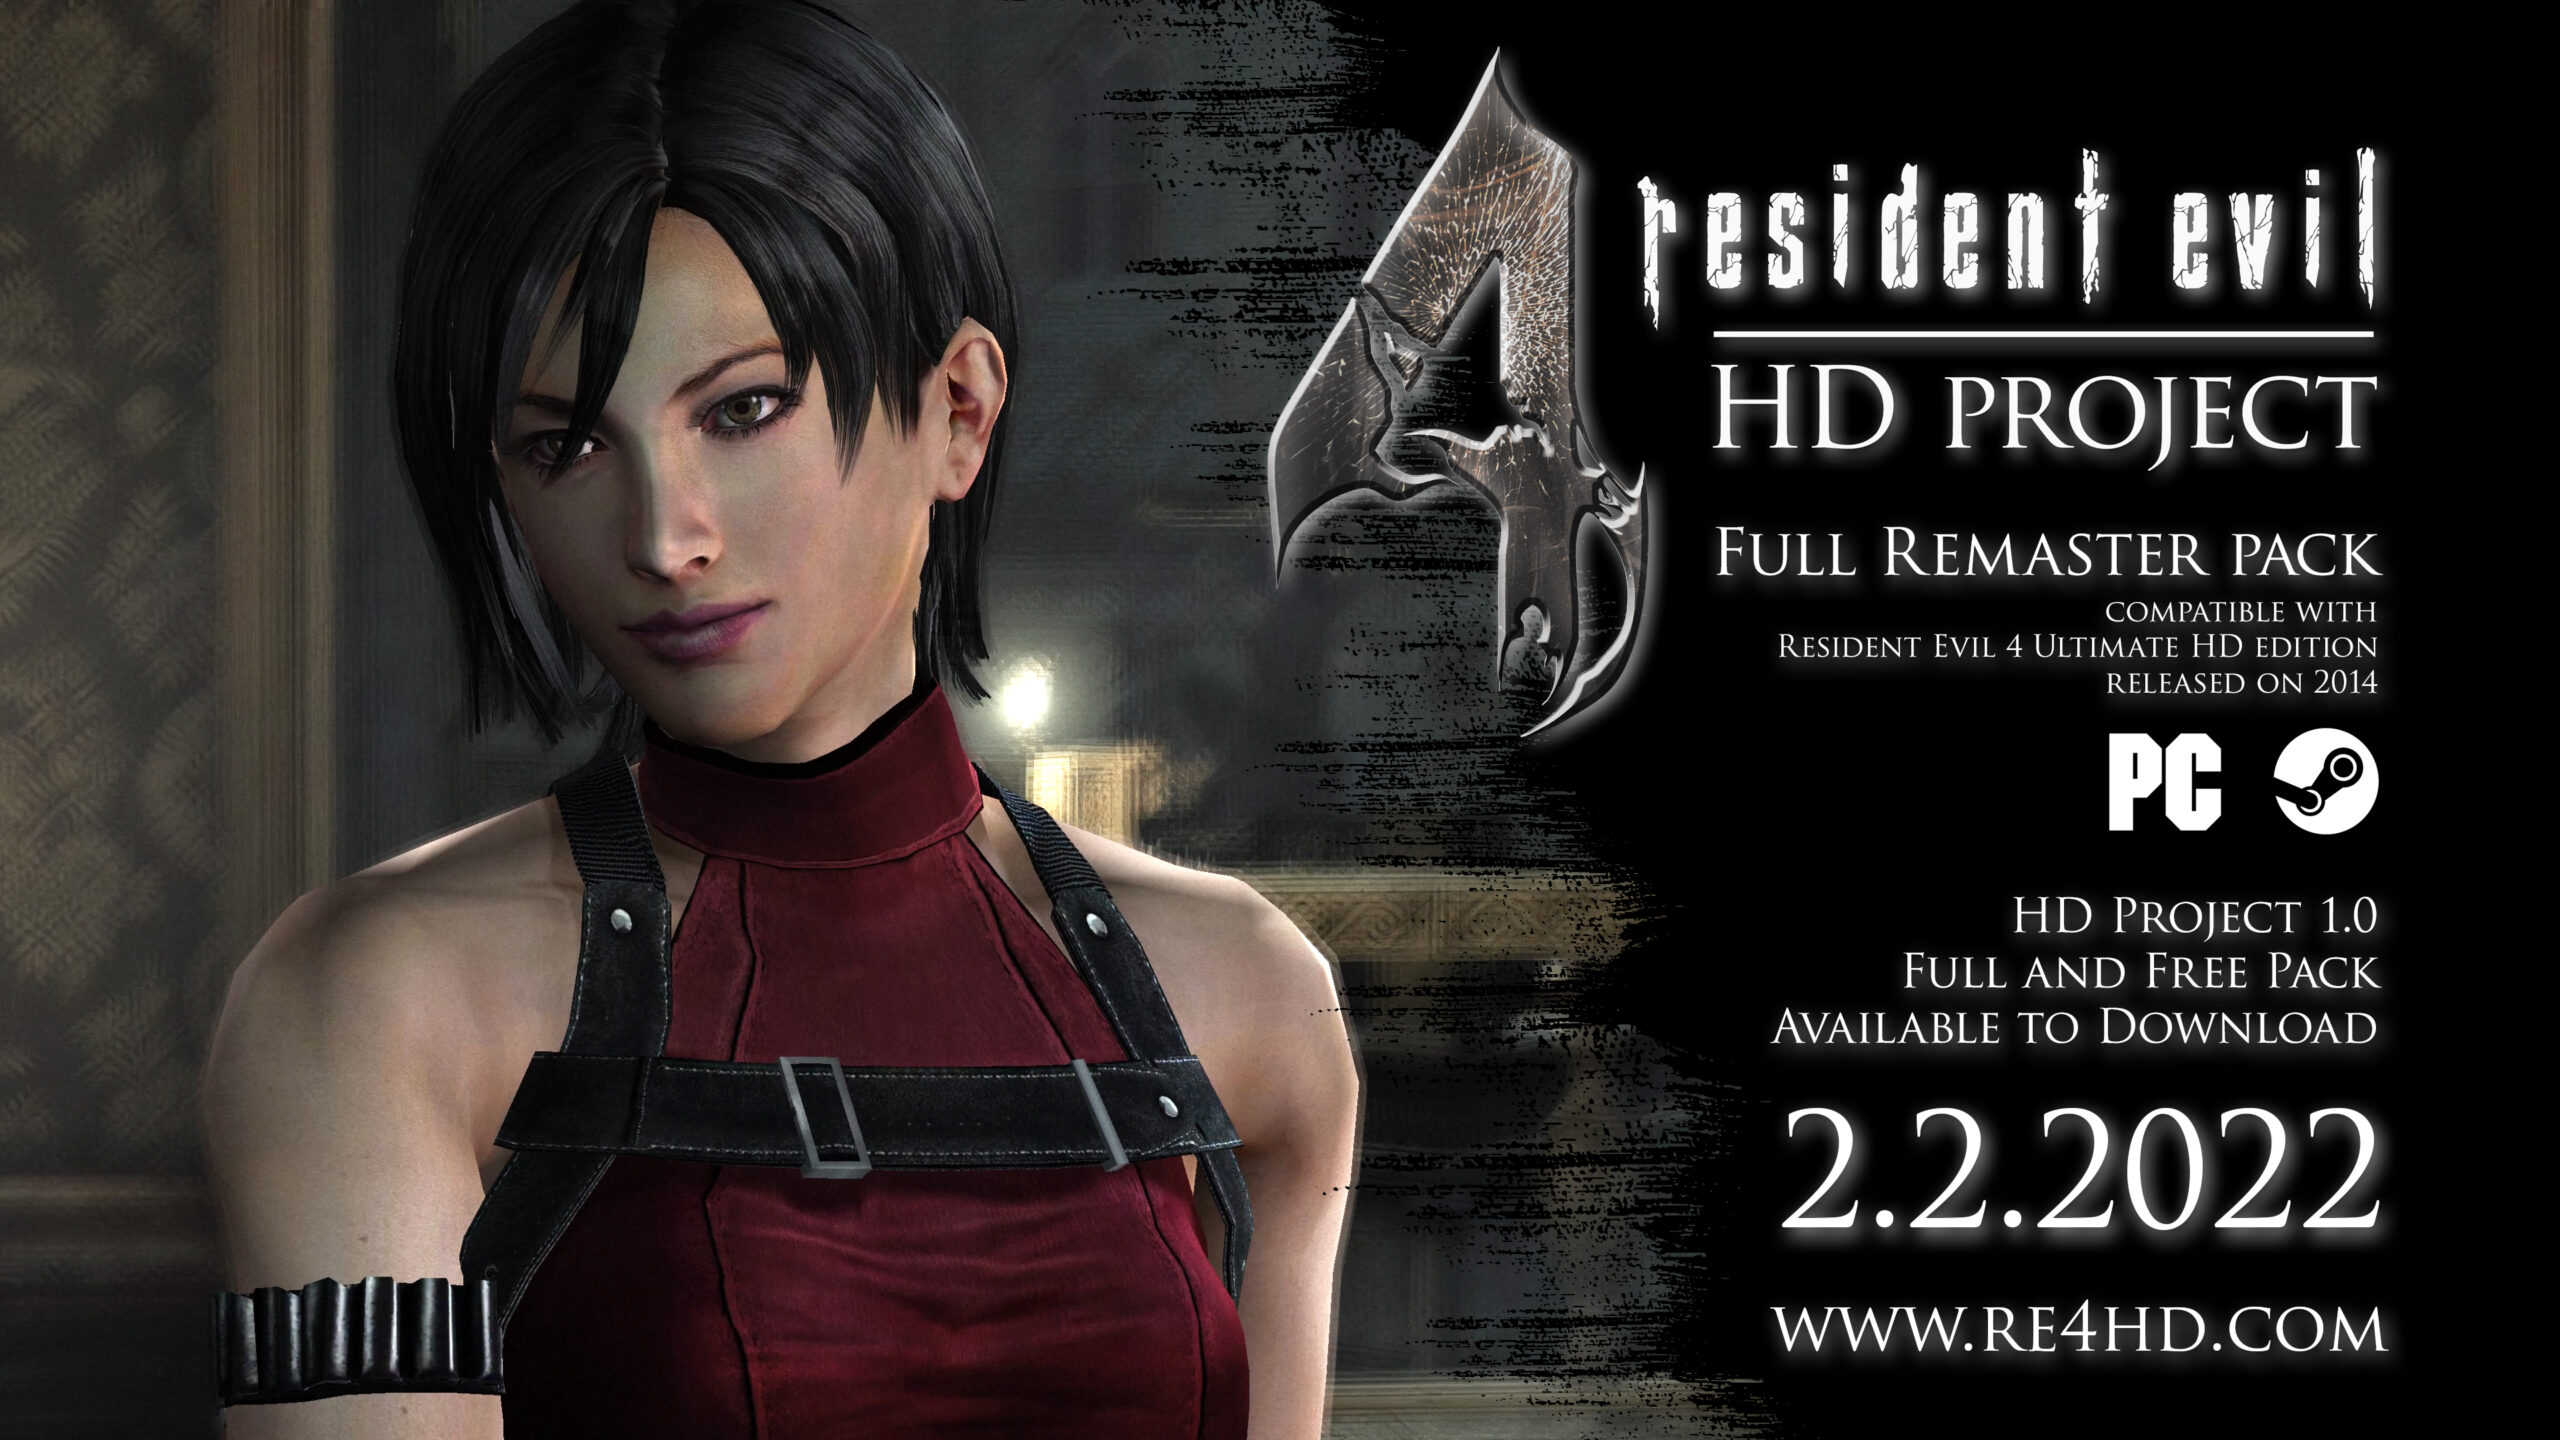 Preview: How the Resident Evil 4 remake improves on the original